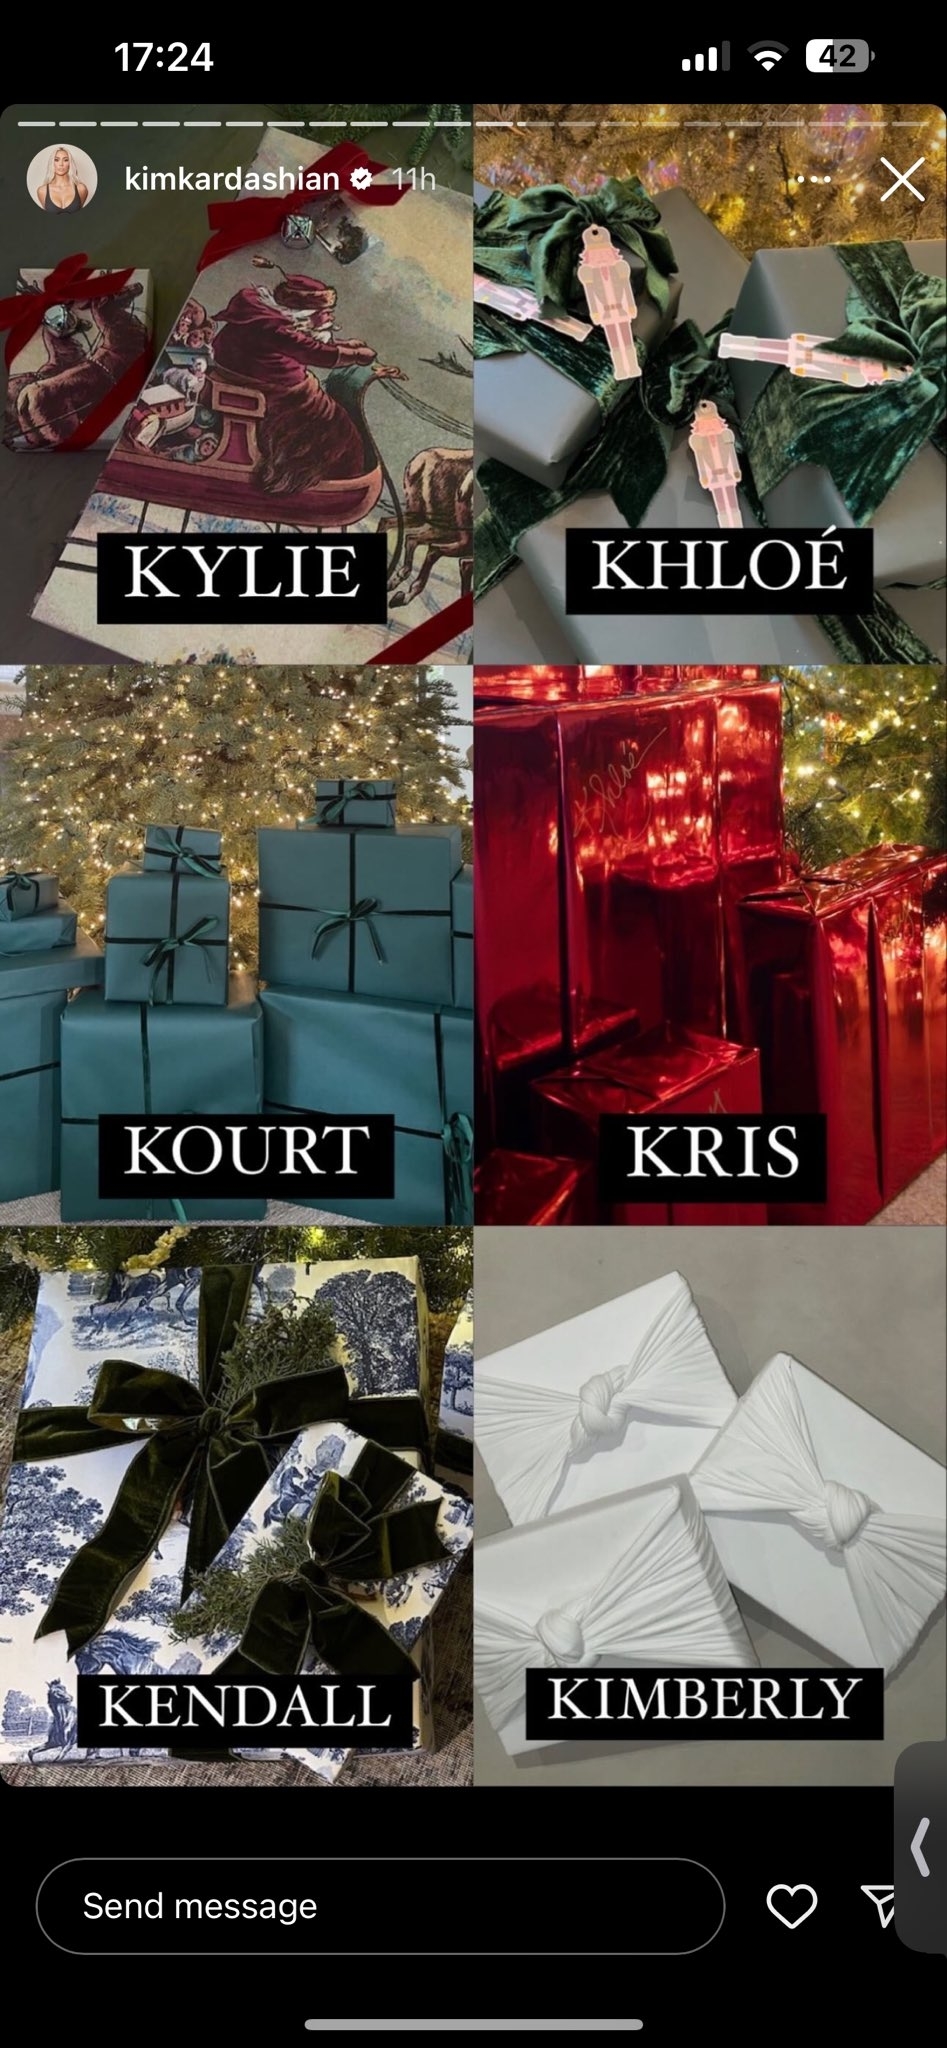 Screenshot from Kim&#x27;s IG story showing different wrapping styles of various family members